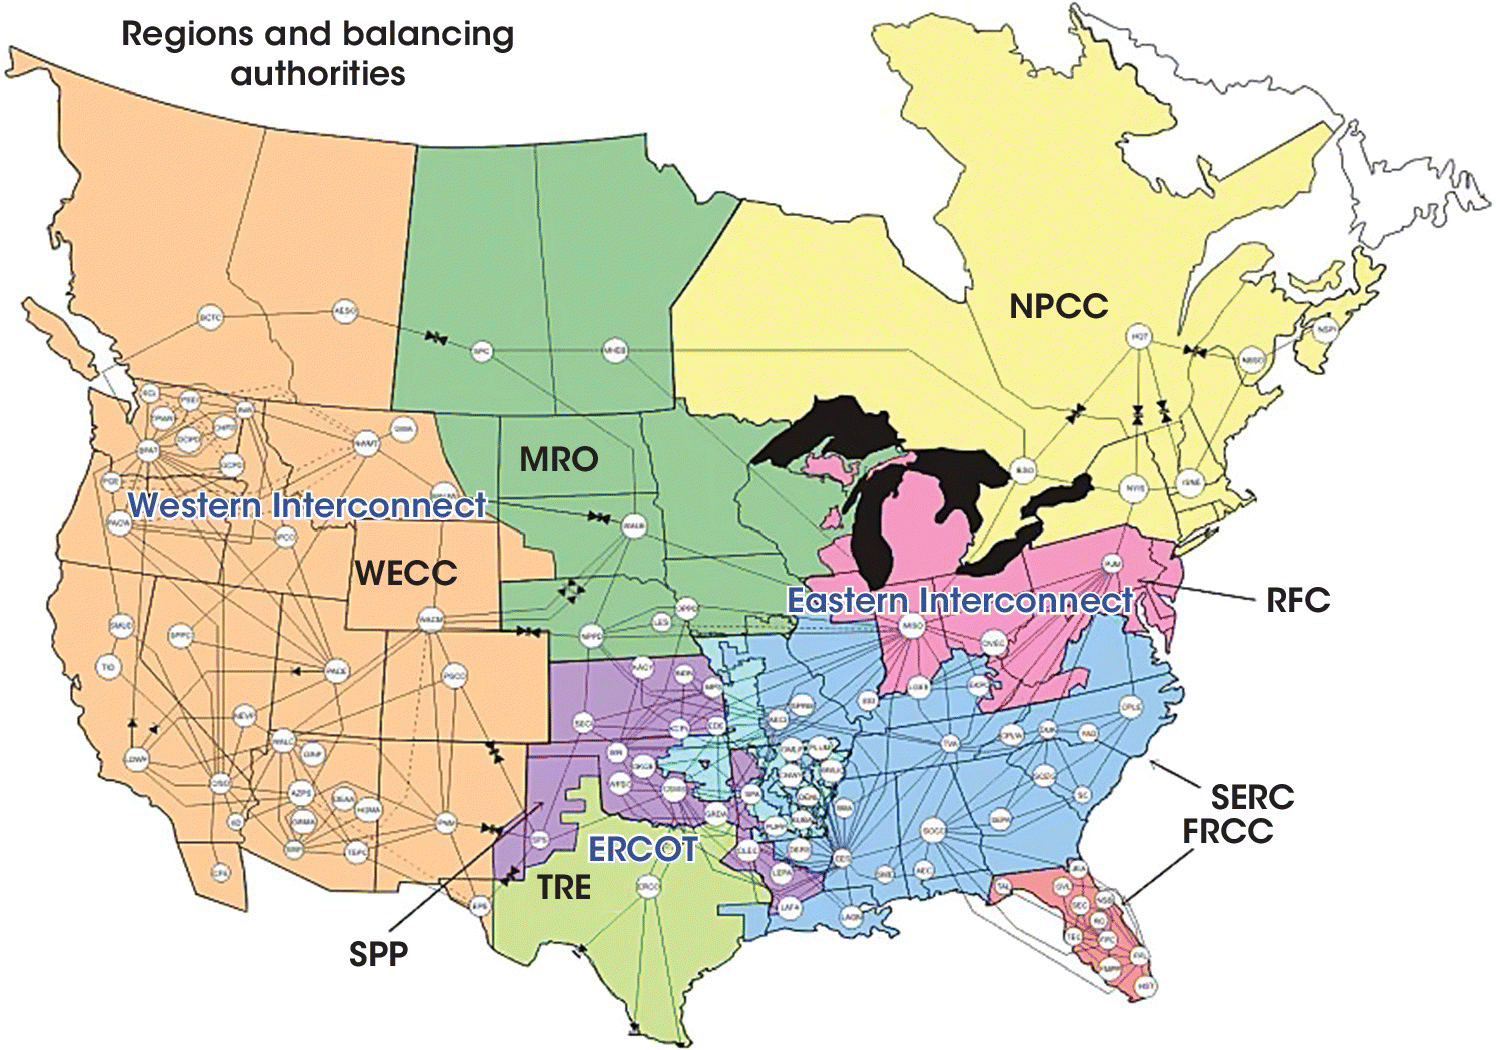 Map of the USA illustrating the electric grid, with regions labeled RFC, SER, FRCC, SPP, MRO, WECC, TRE, NPCC, Western Interconnect, Eastern Interconnect, and ERCOT.